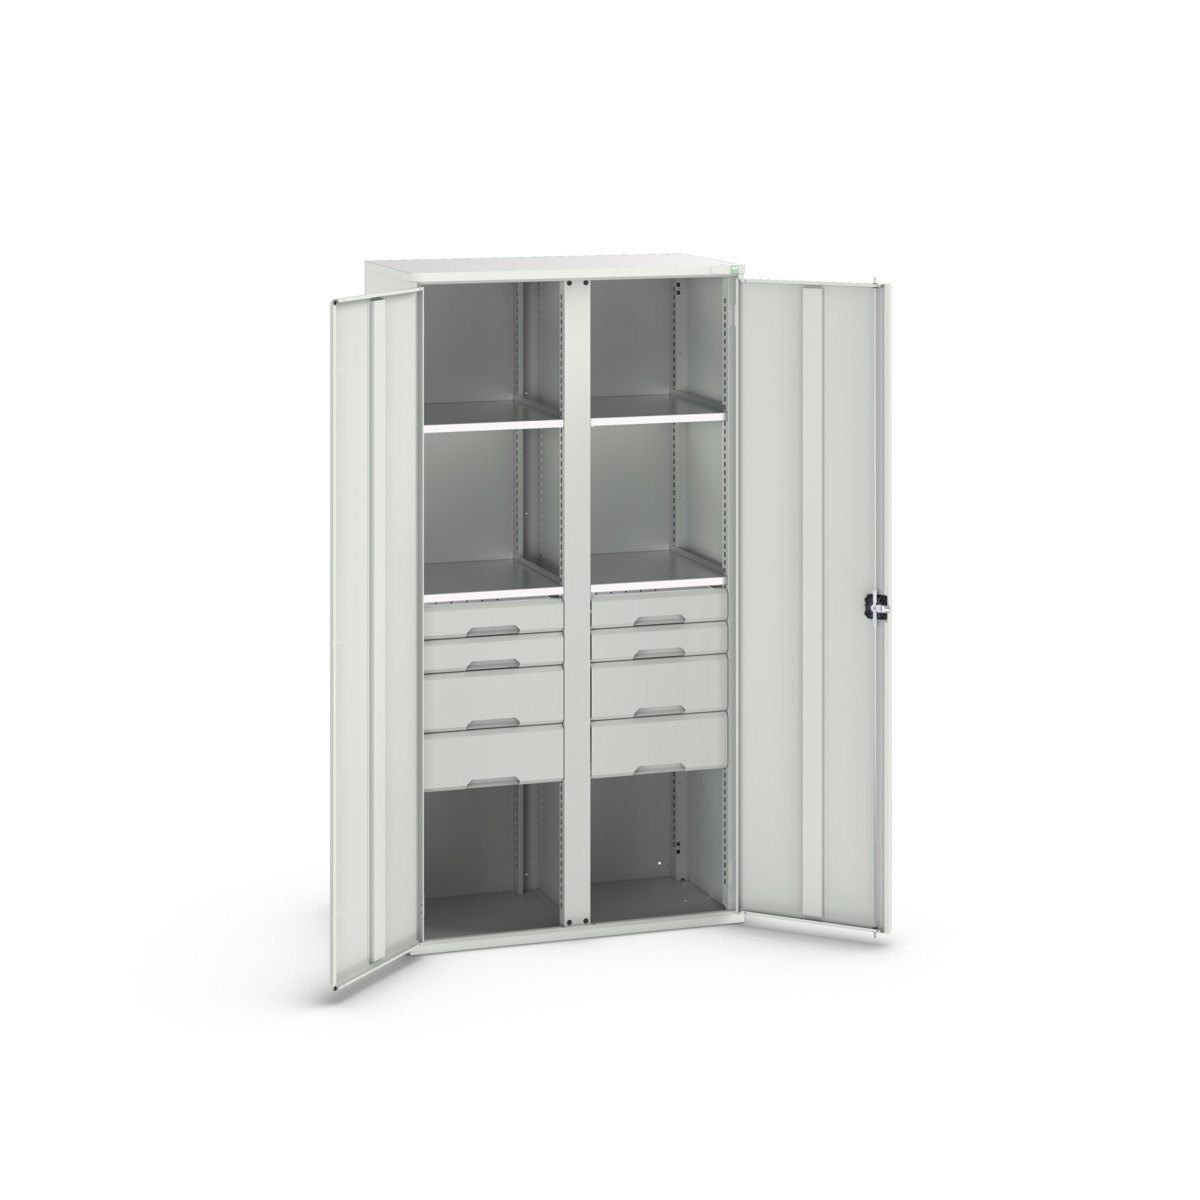 16926583.16 - verso kitted cupboard